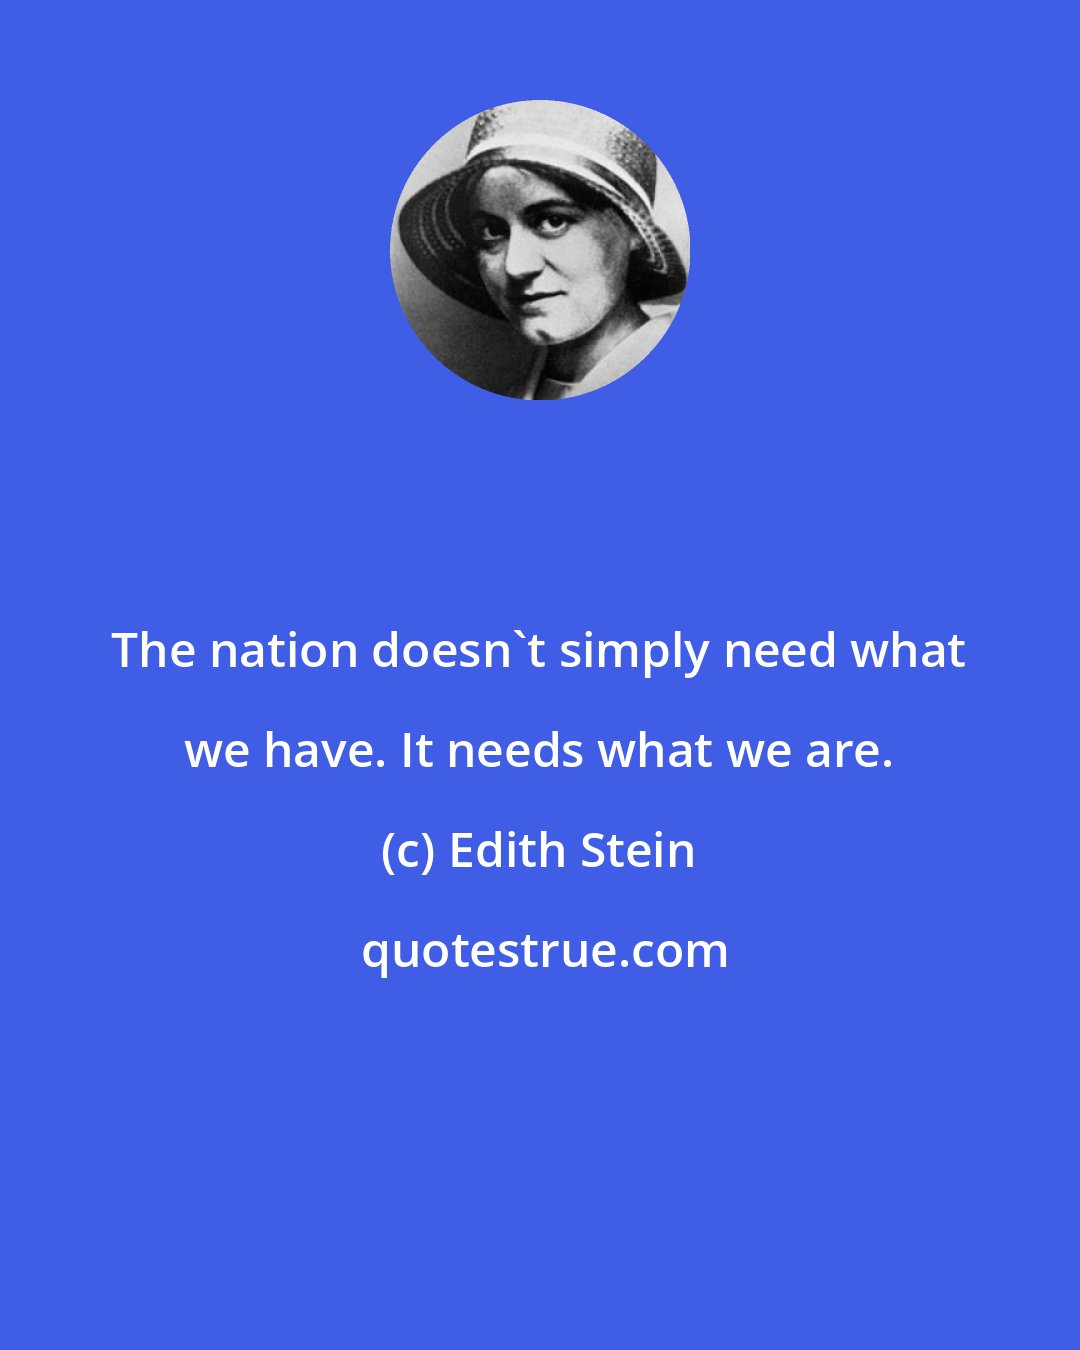 Edith Stein: The nation doesn't simply need what we have. It needs what we are.